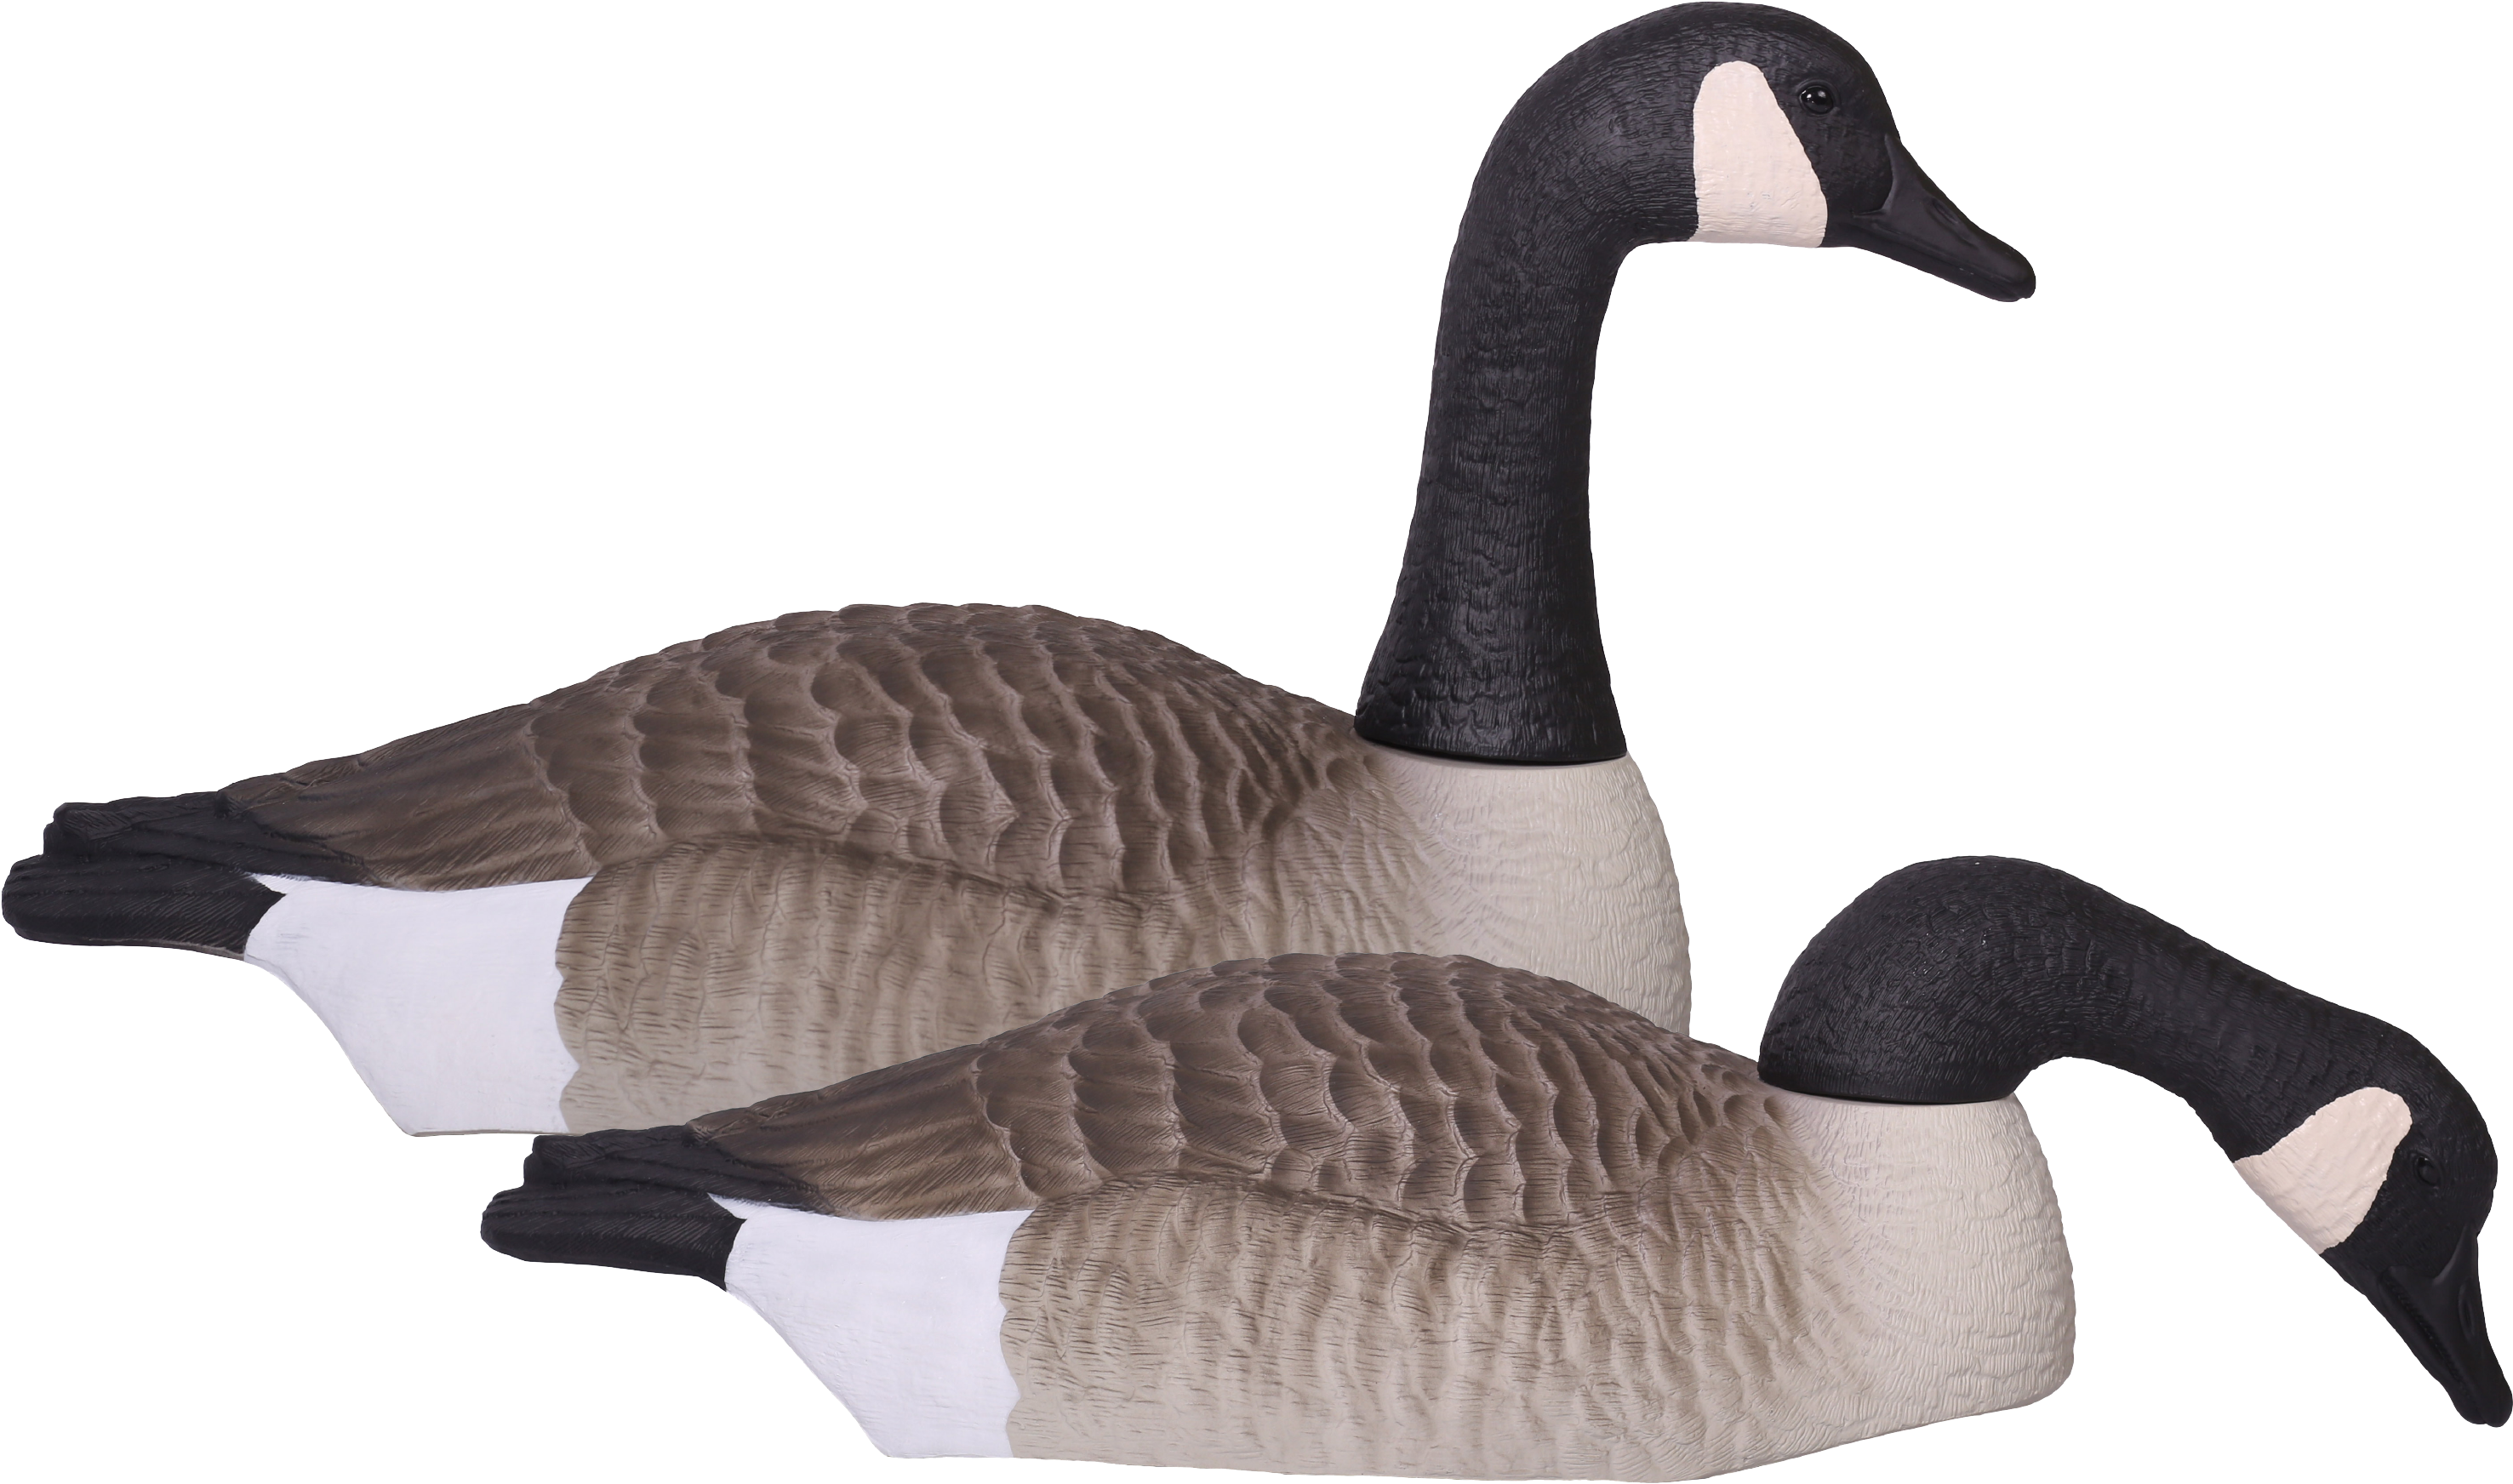 A Pair Of Geese On A Black Background